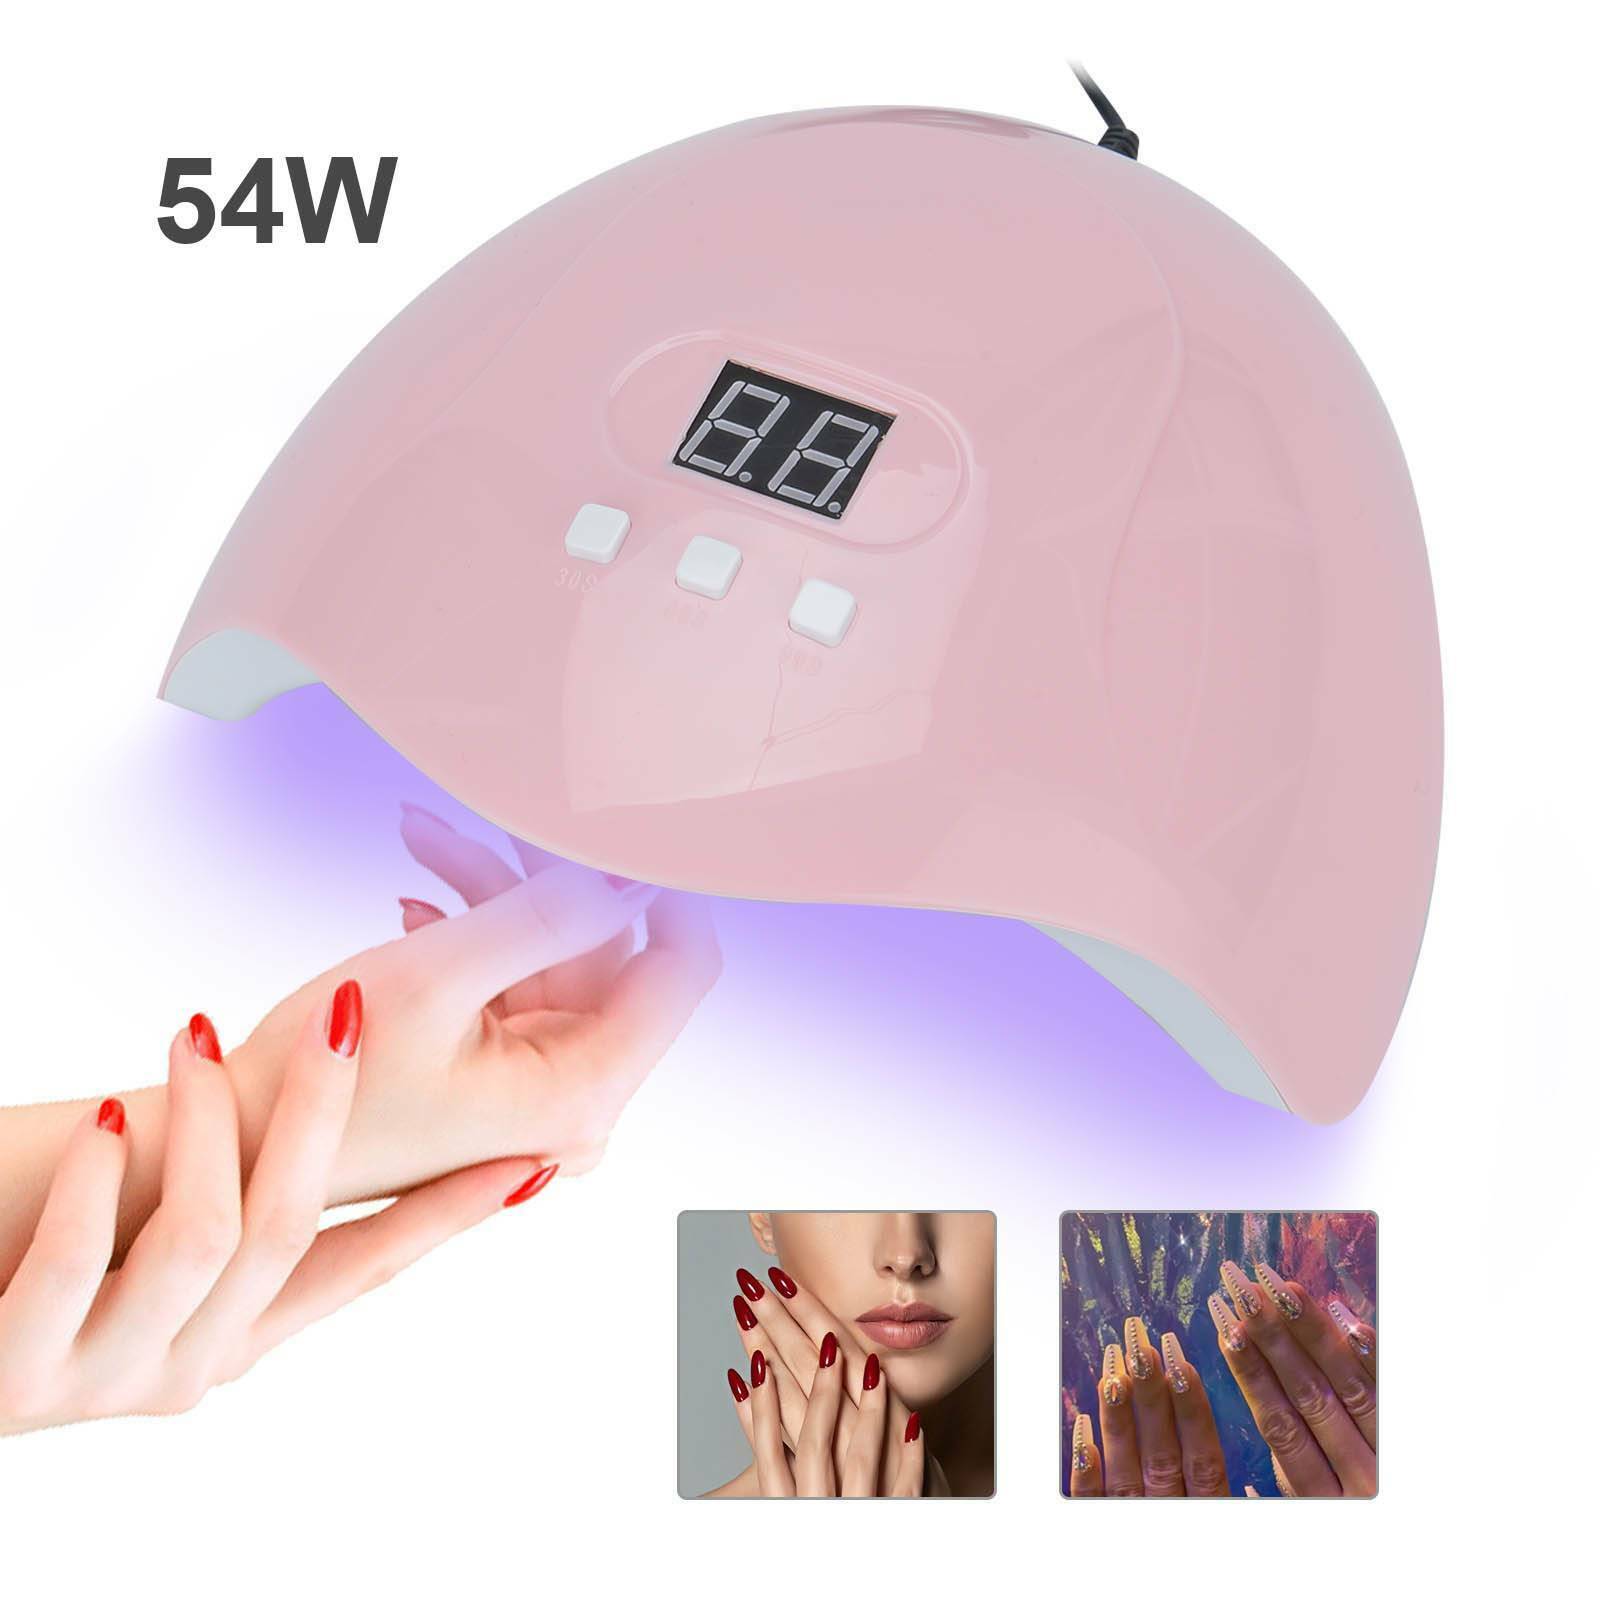 What Is the Best Nail Dryer Machine for Regular Polish? - HubPages